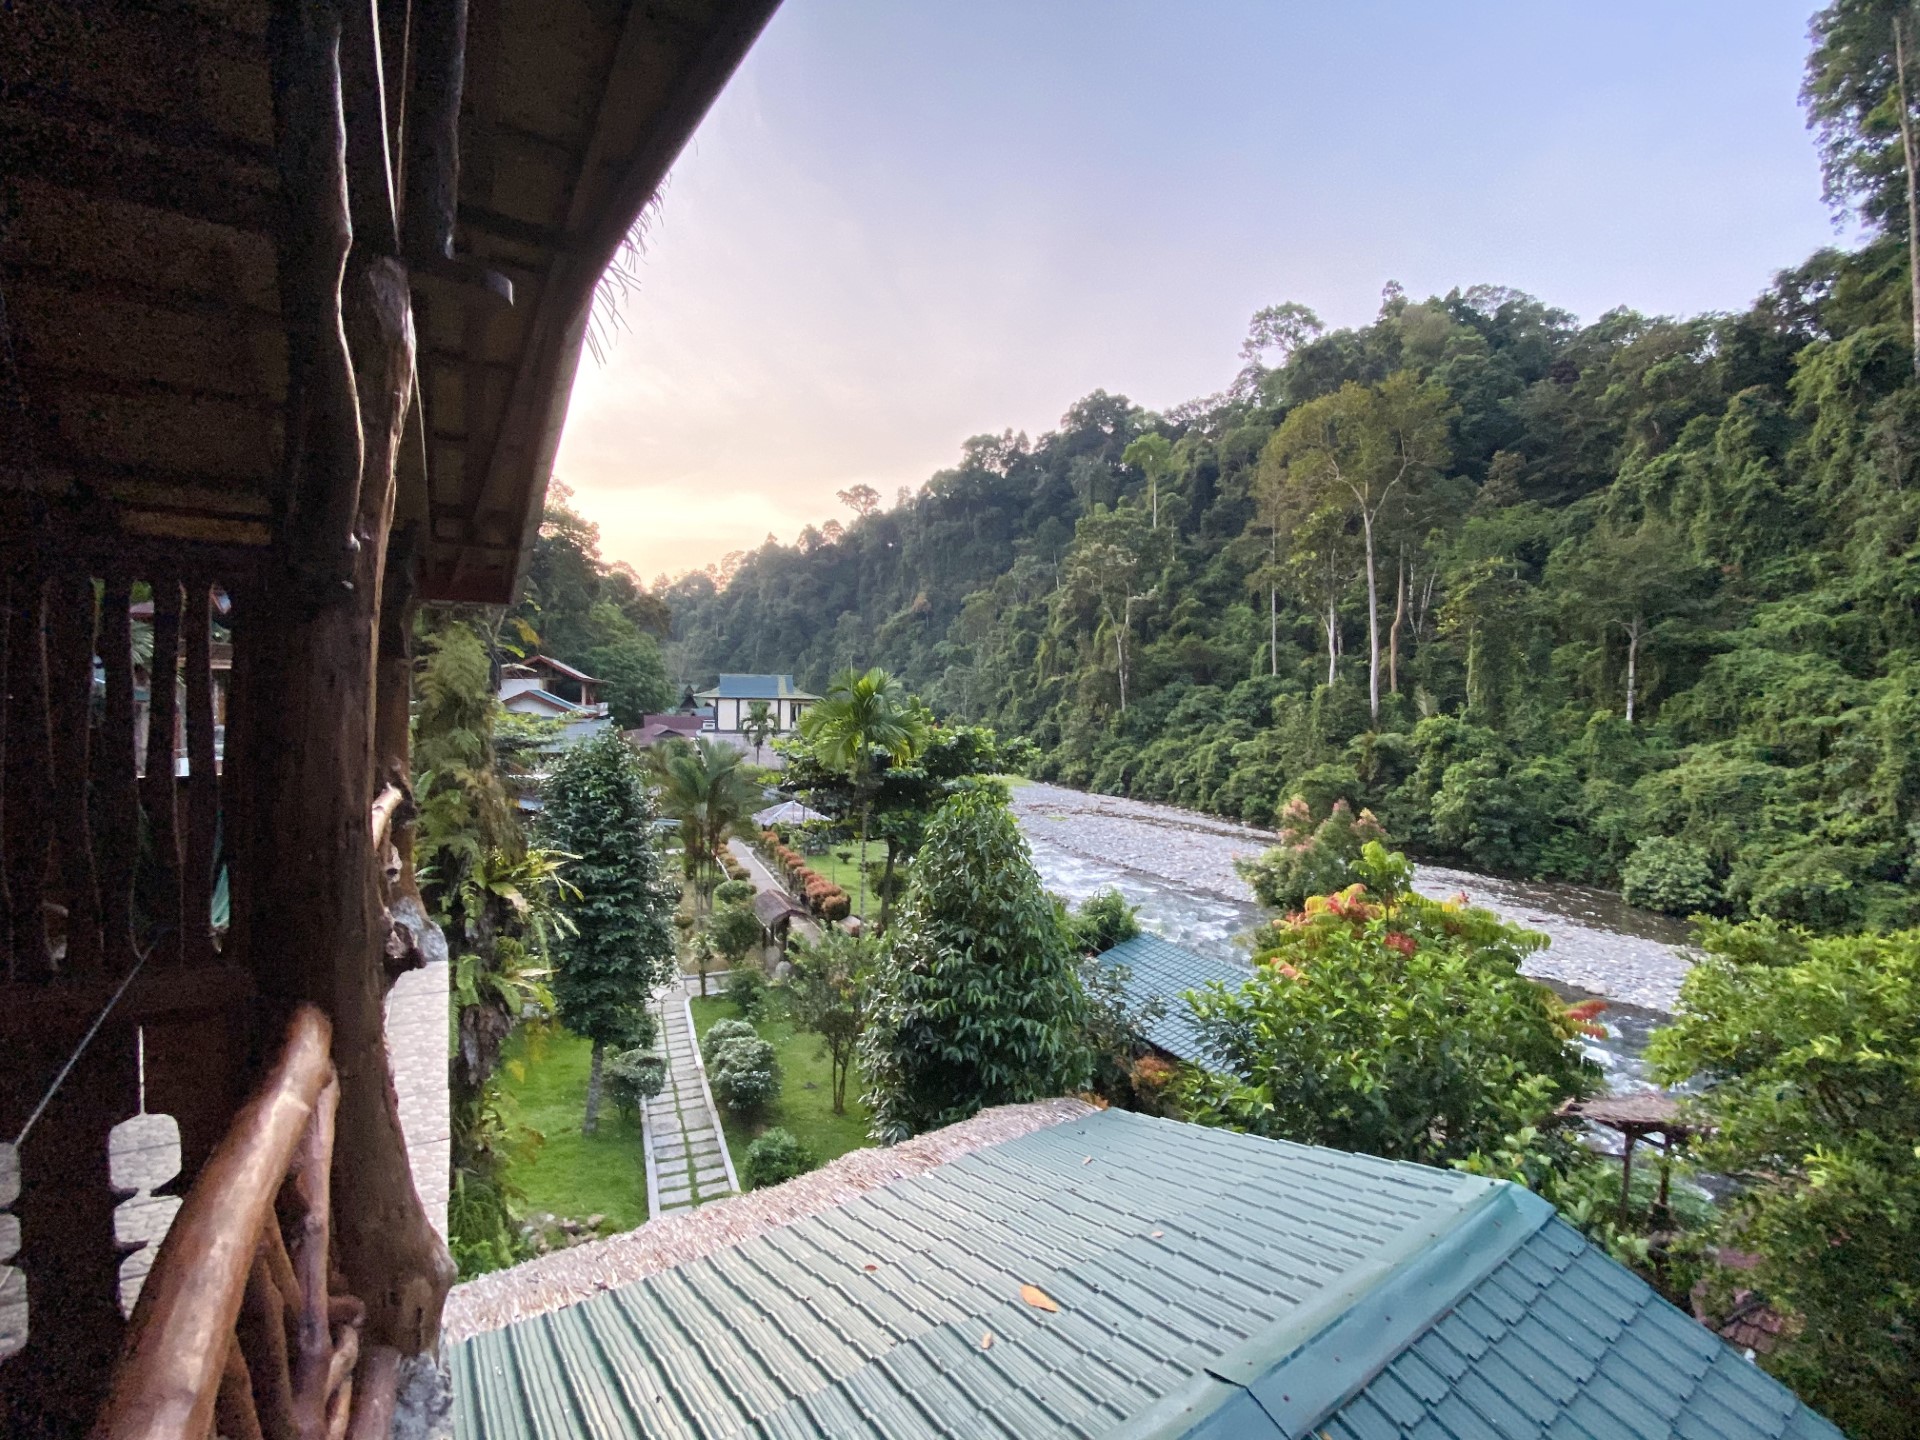 Stunning jungle views from our balcony